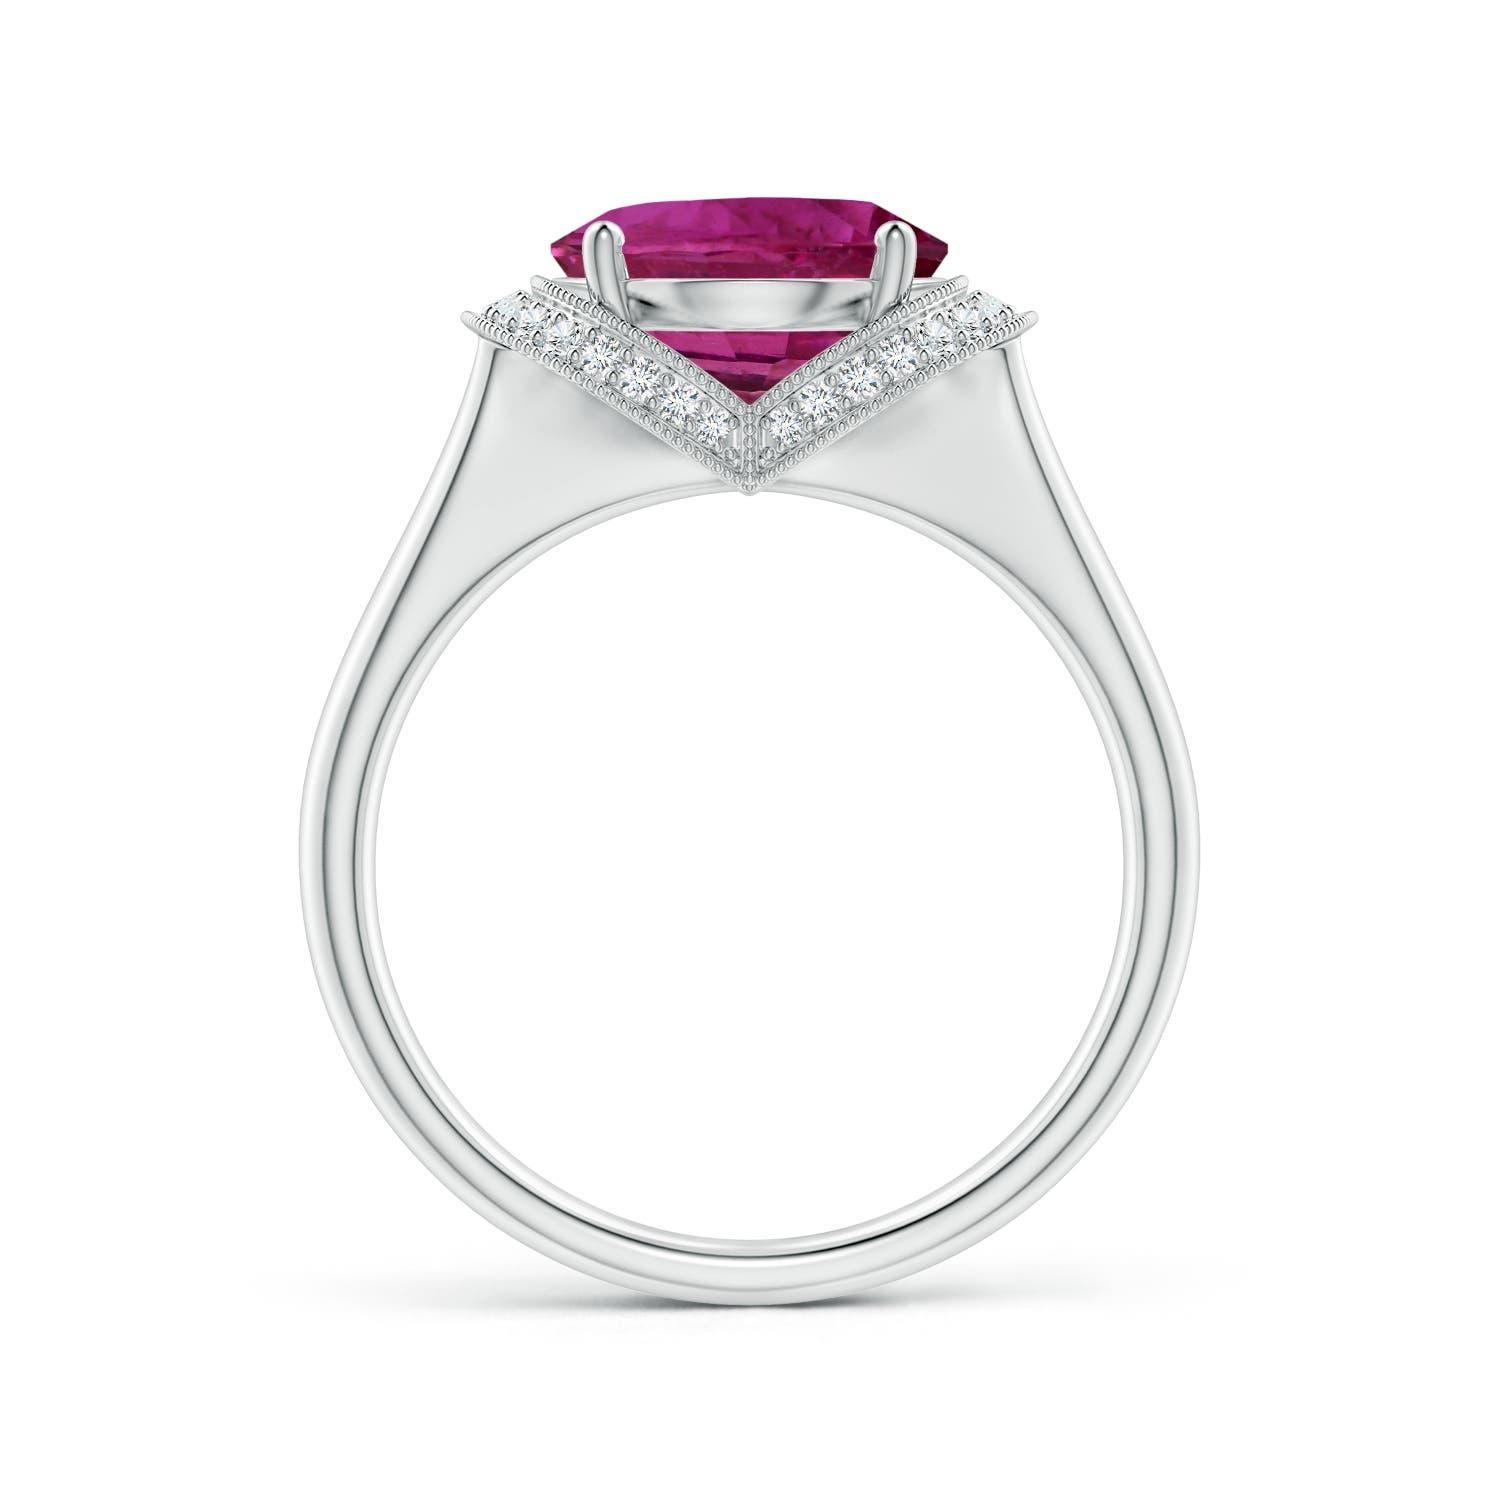 For Sale:  Angara Gia Certified Pink Sapphire Ring in White Gold with Diamond Half Halo 2